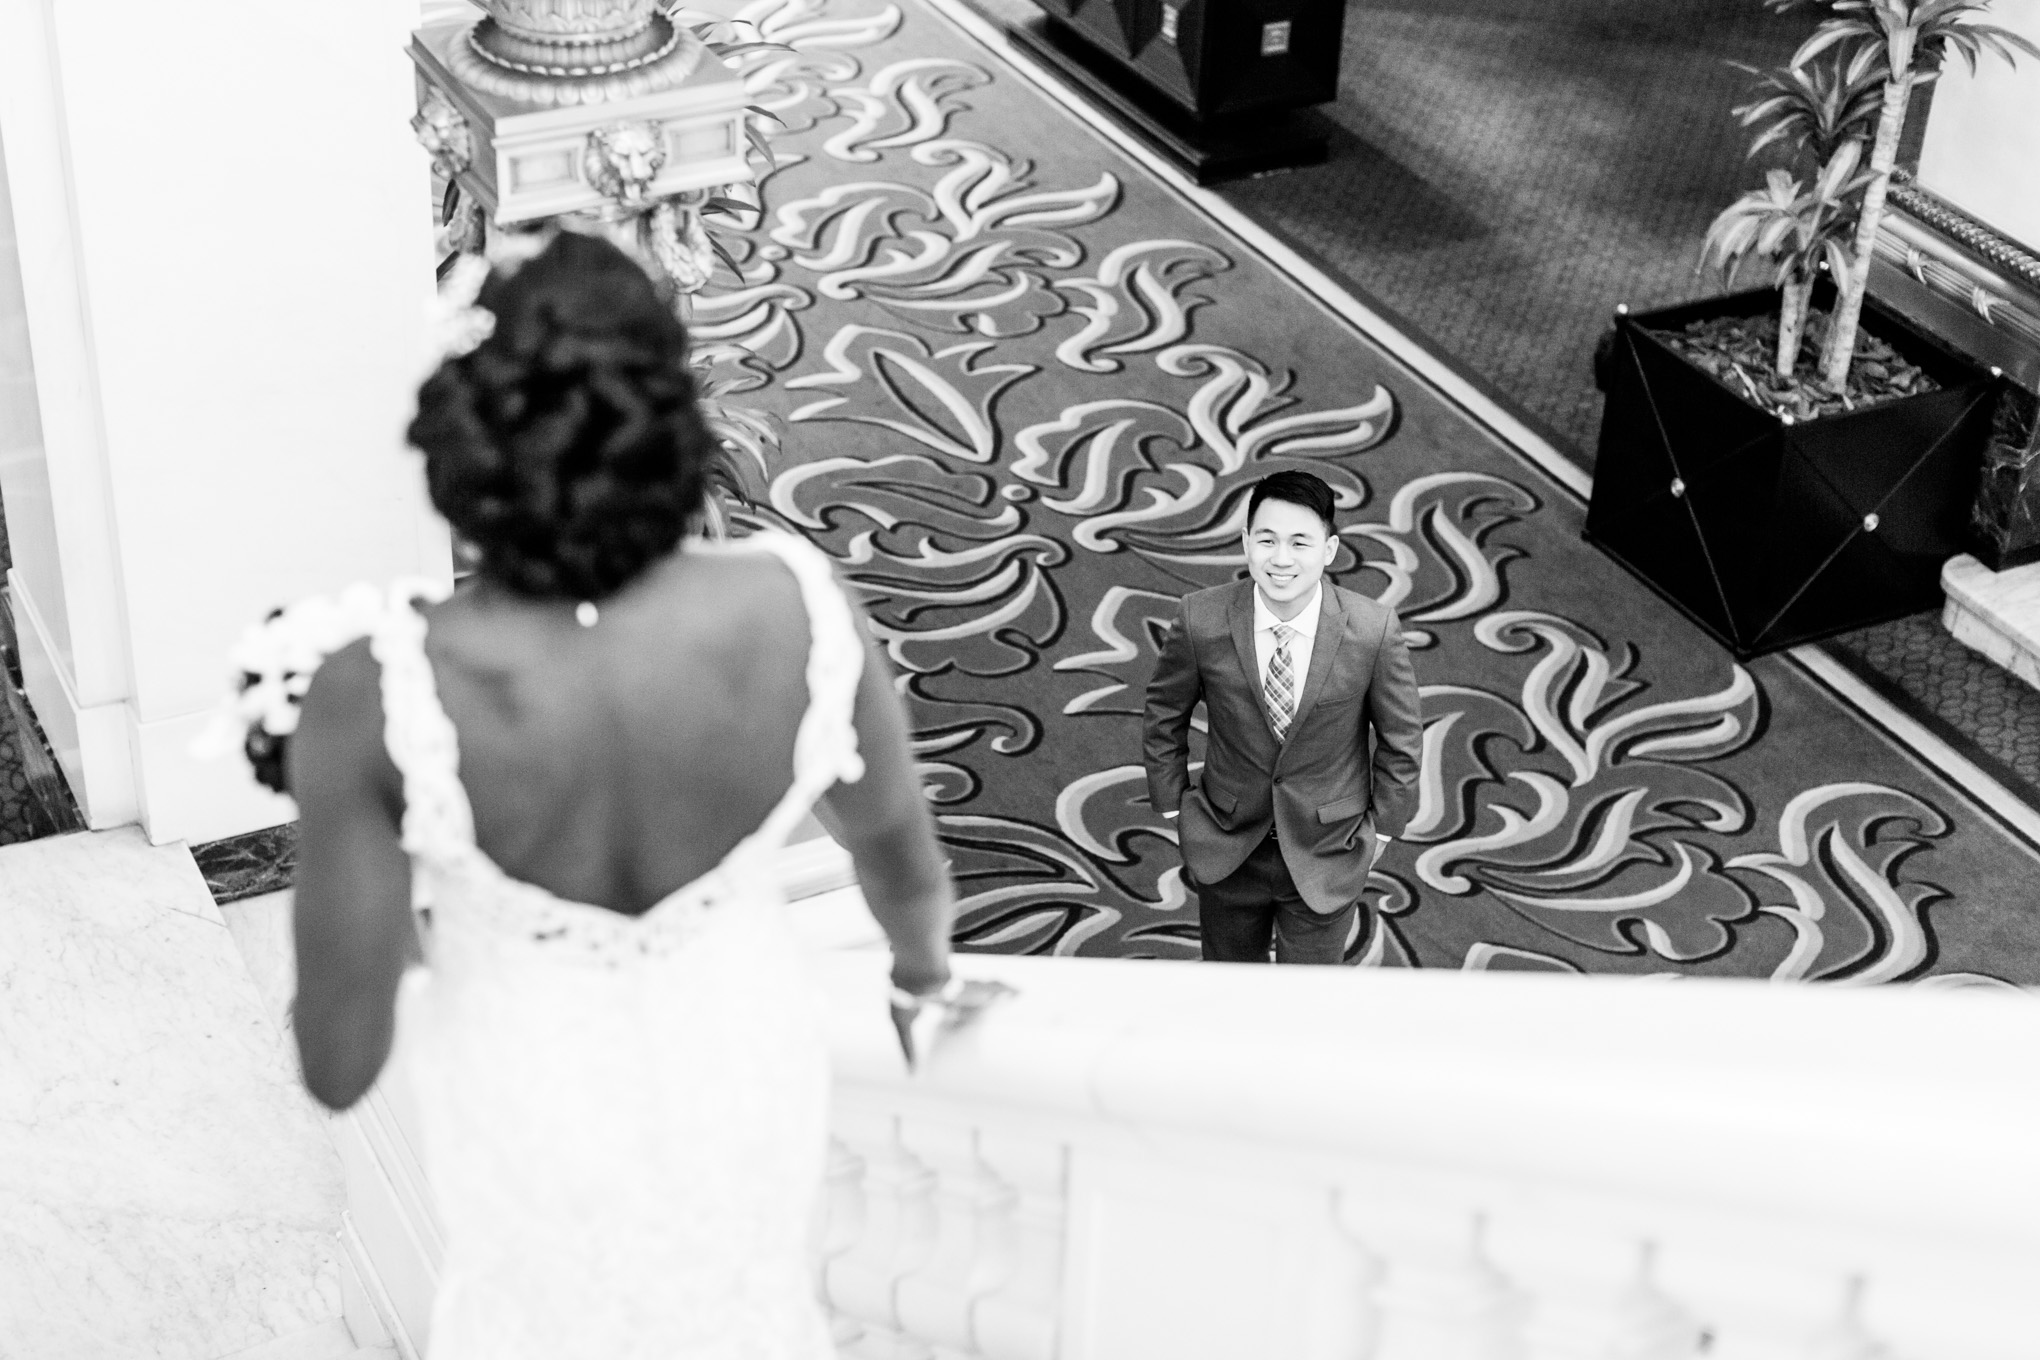 classic Baltimore wedding, Baltimore wedding, Hotel Monaco Baltimorre, Kimpton Hotel Monaco Baltimore, Kimpton Hotels, indoor wedding, flash photography, Maryland wedding, Maryland wedding photography, Maryland wedding photographer, Baltimore wedding photographer, DC wedding photographer, hotel wedding, classic wedding, Zales wedding rings, Essence of Australia, Dolled by Nueye, Talia Yvette, Sensational Flowers, black and white wedding photography, first look